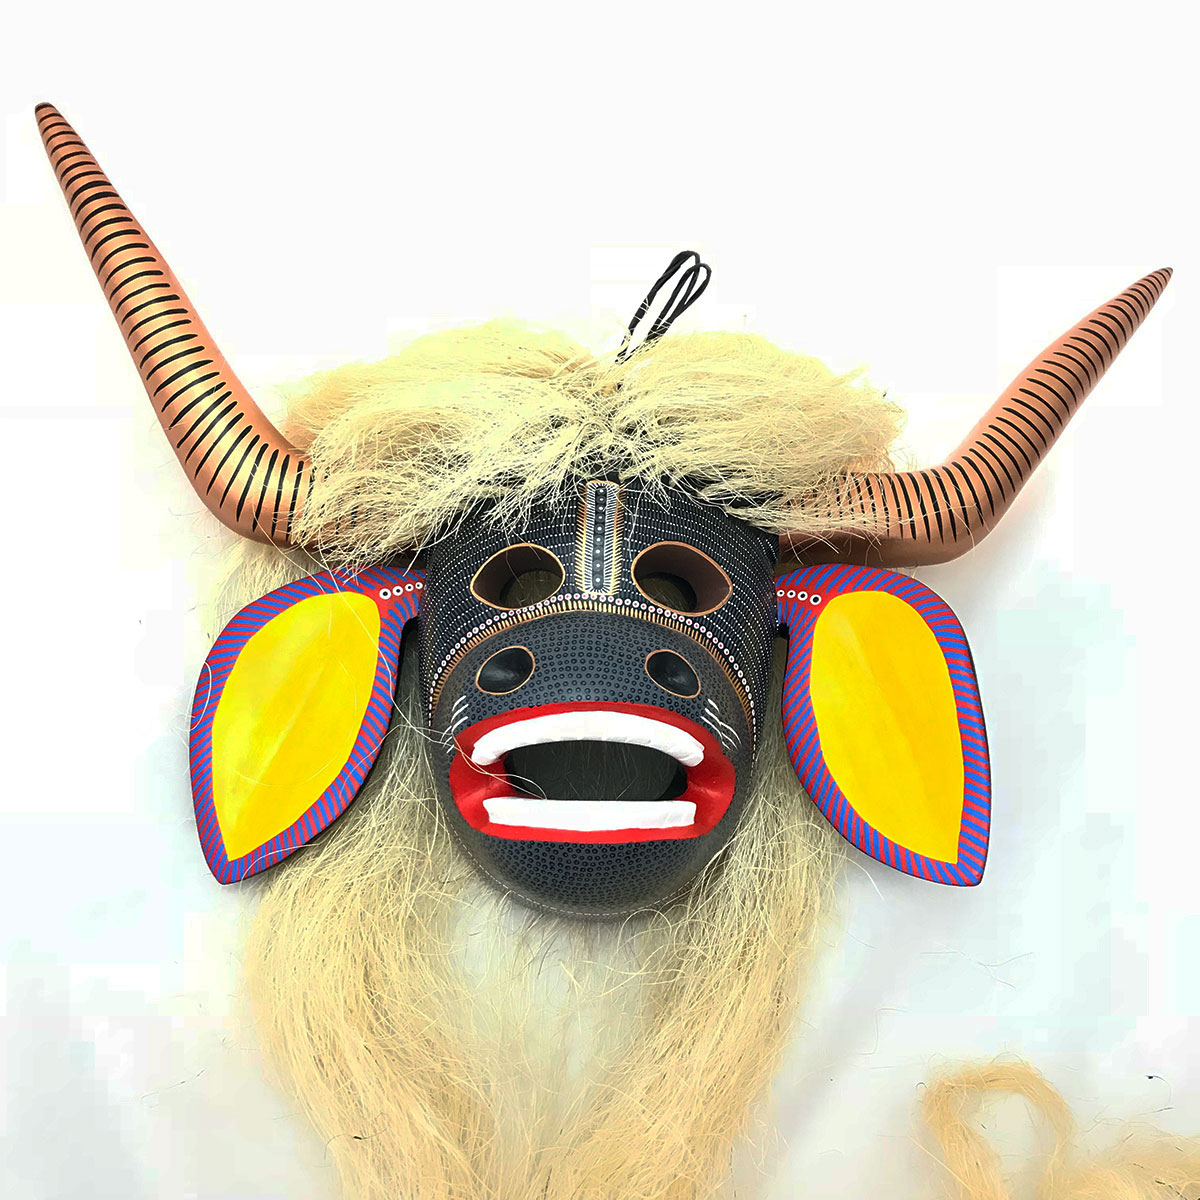 Abad Xuana Abad Xuana: Large Cow Mask cows